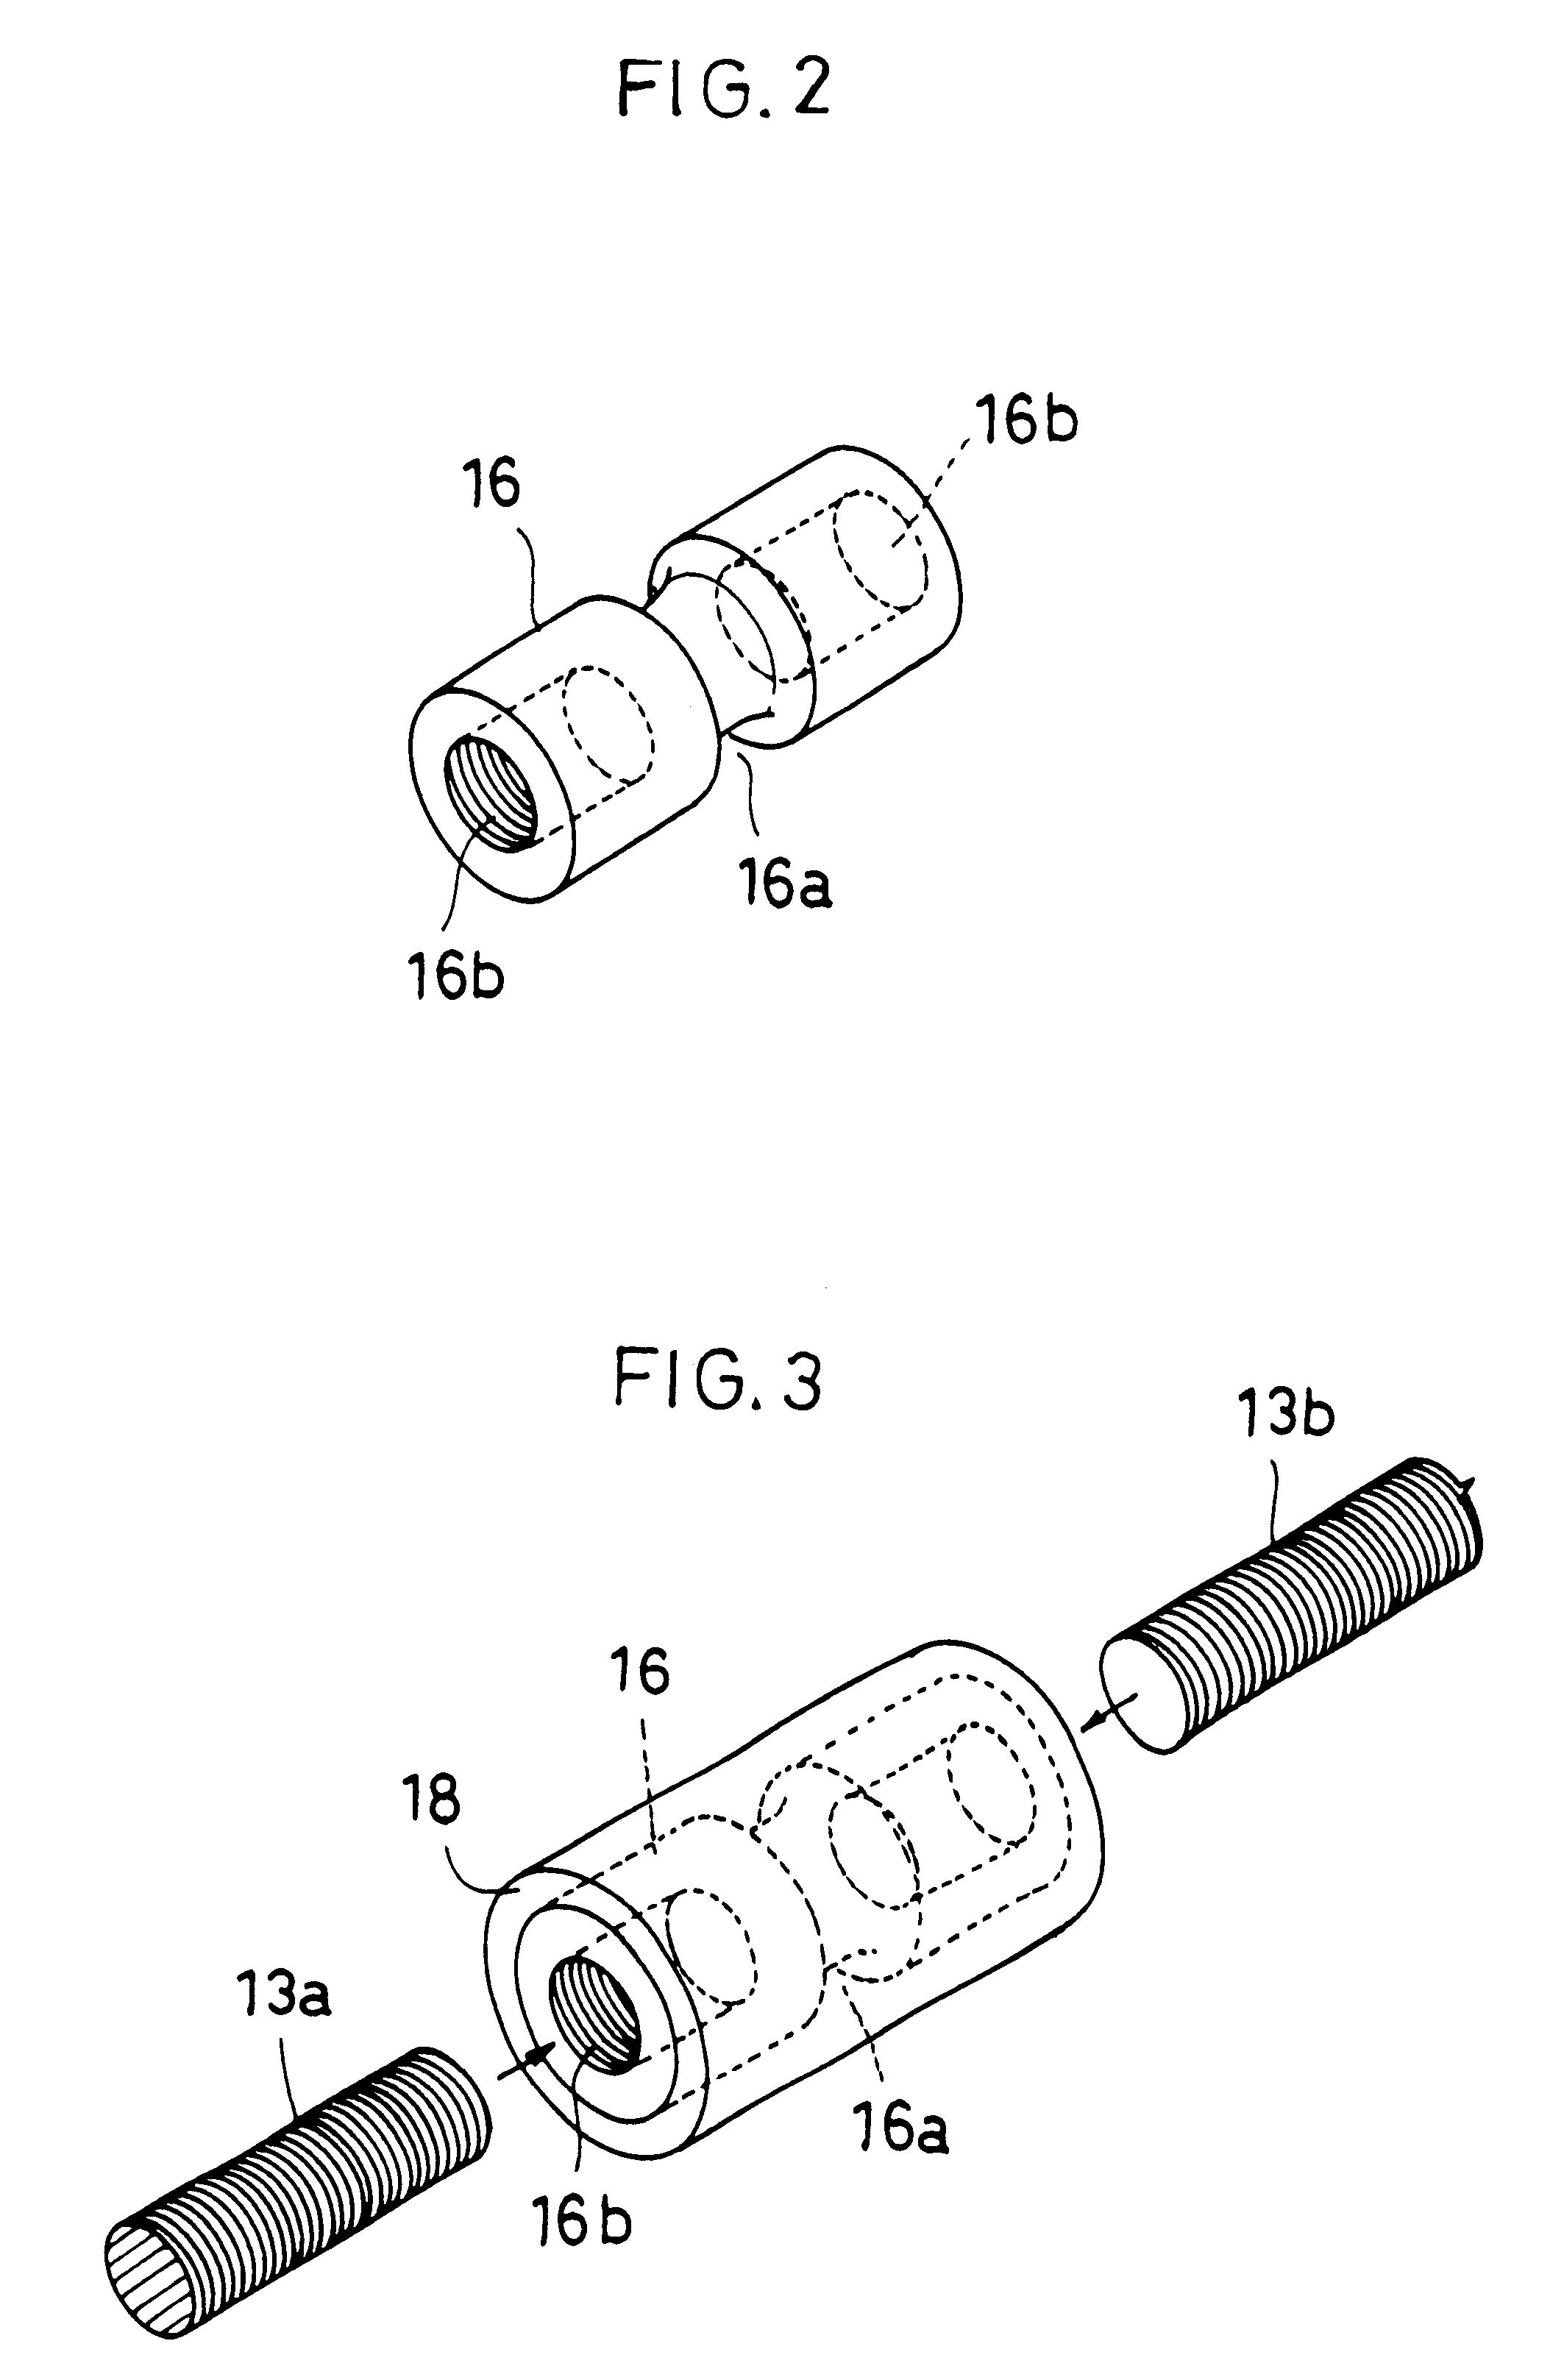 Flexible joint and long nut for flexible joint